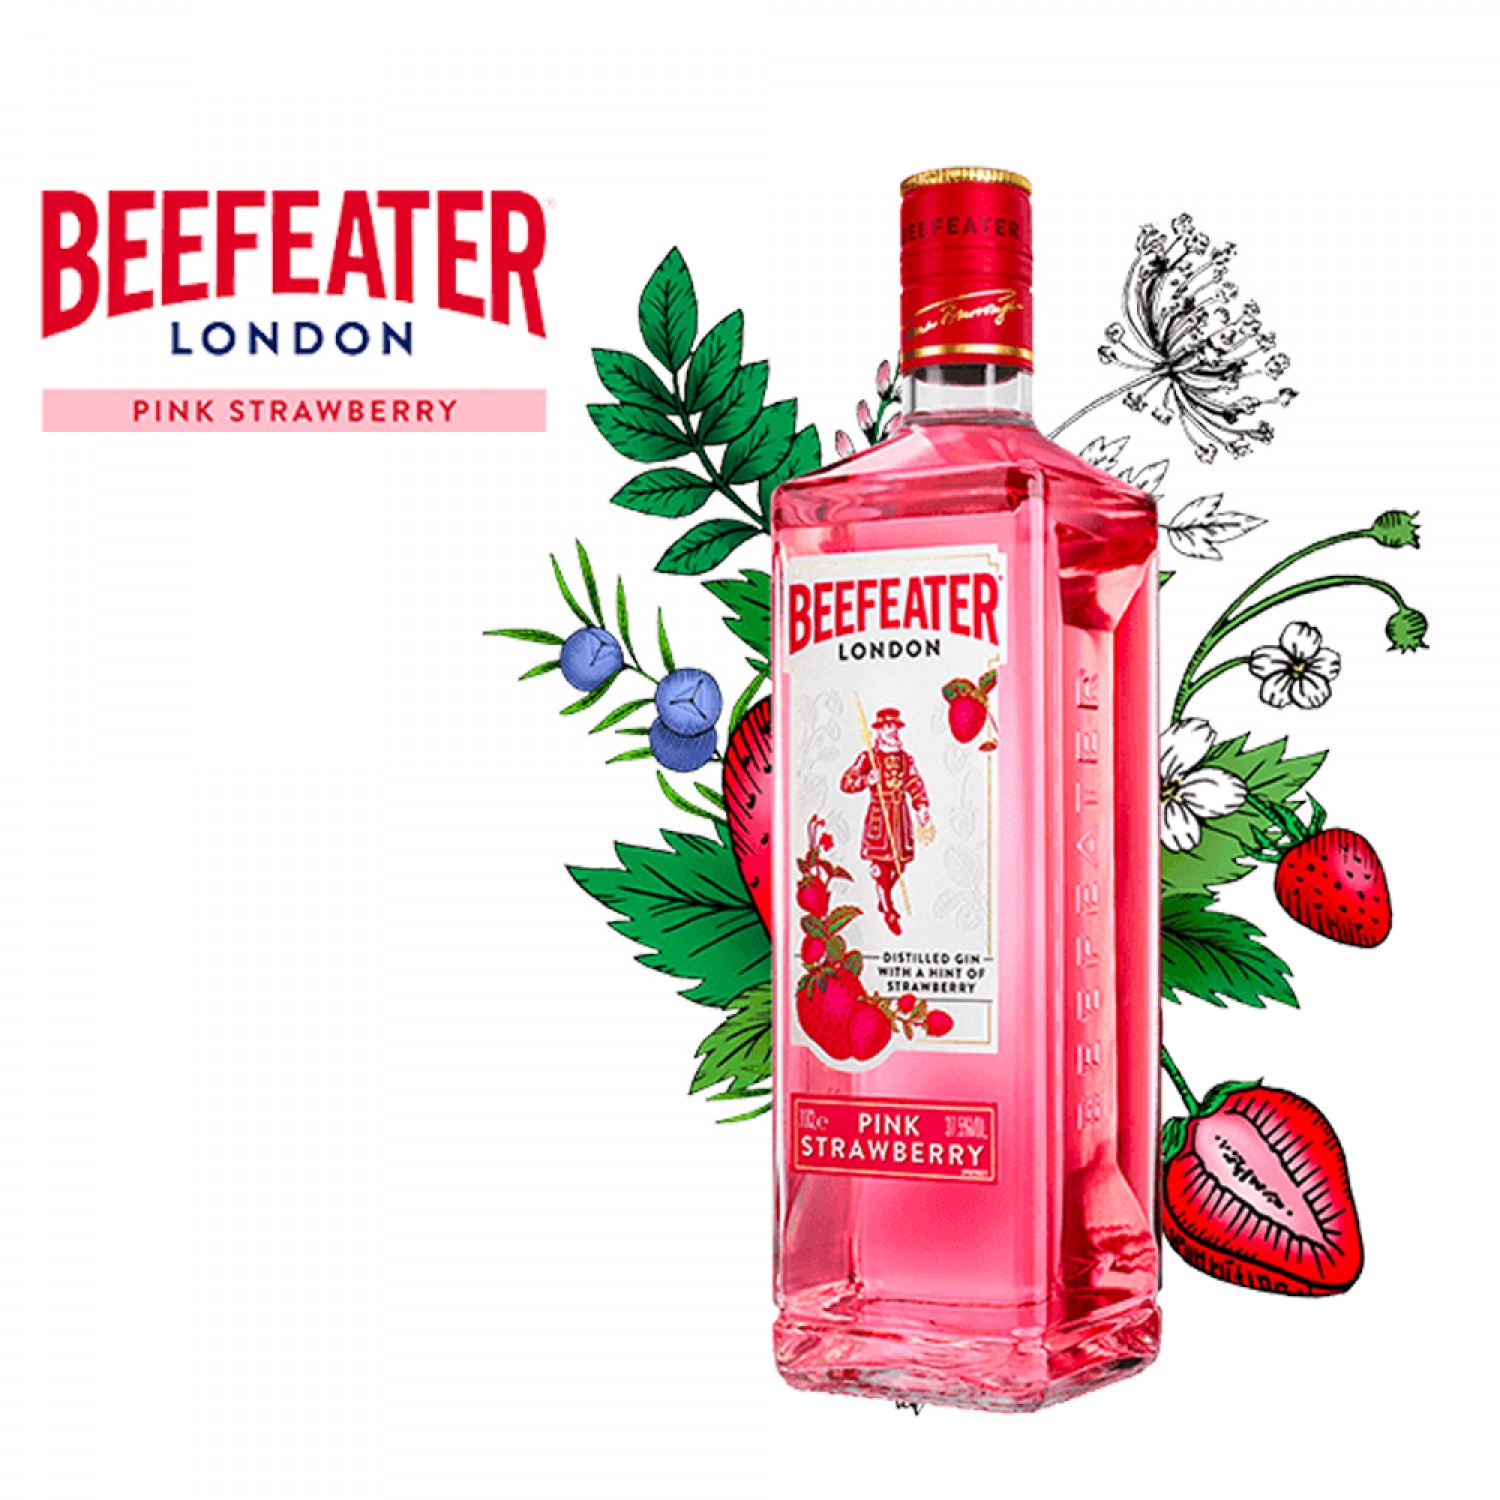 Beefeater Pink Strawberry Gin 700ml